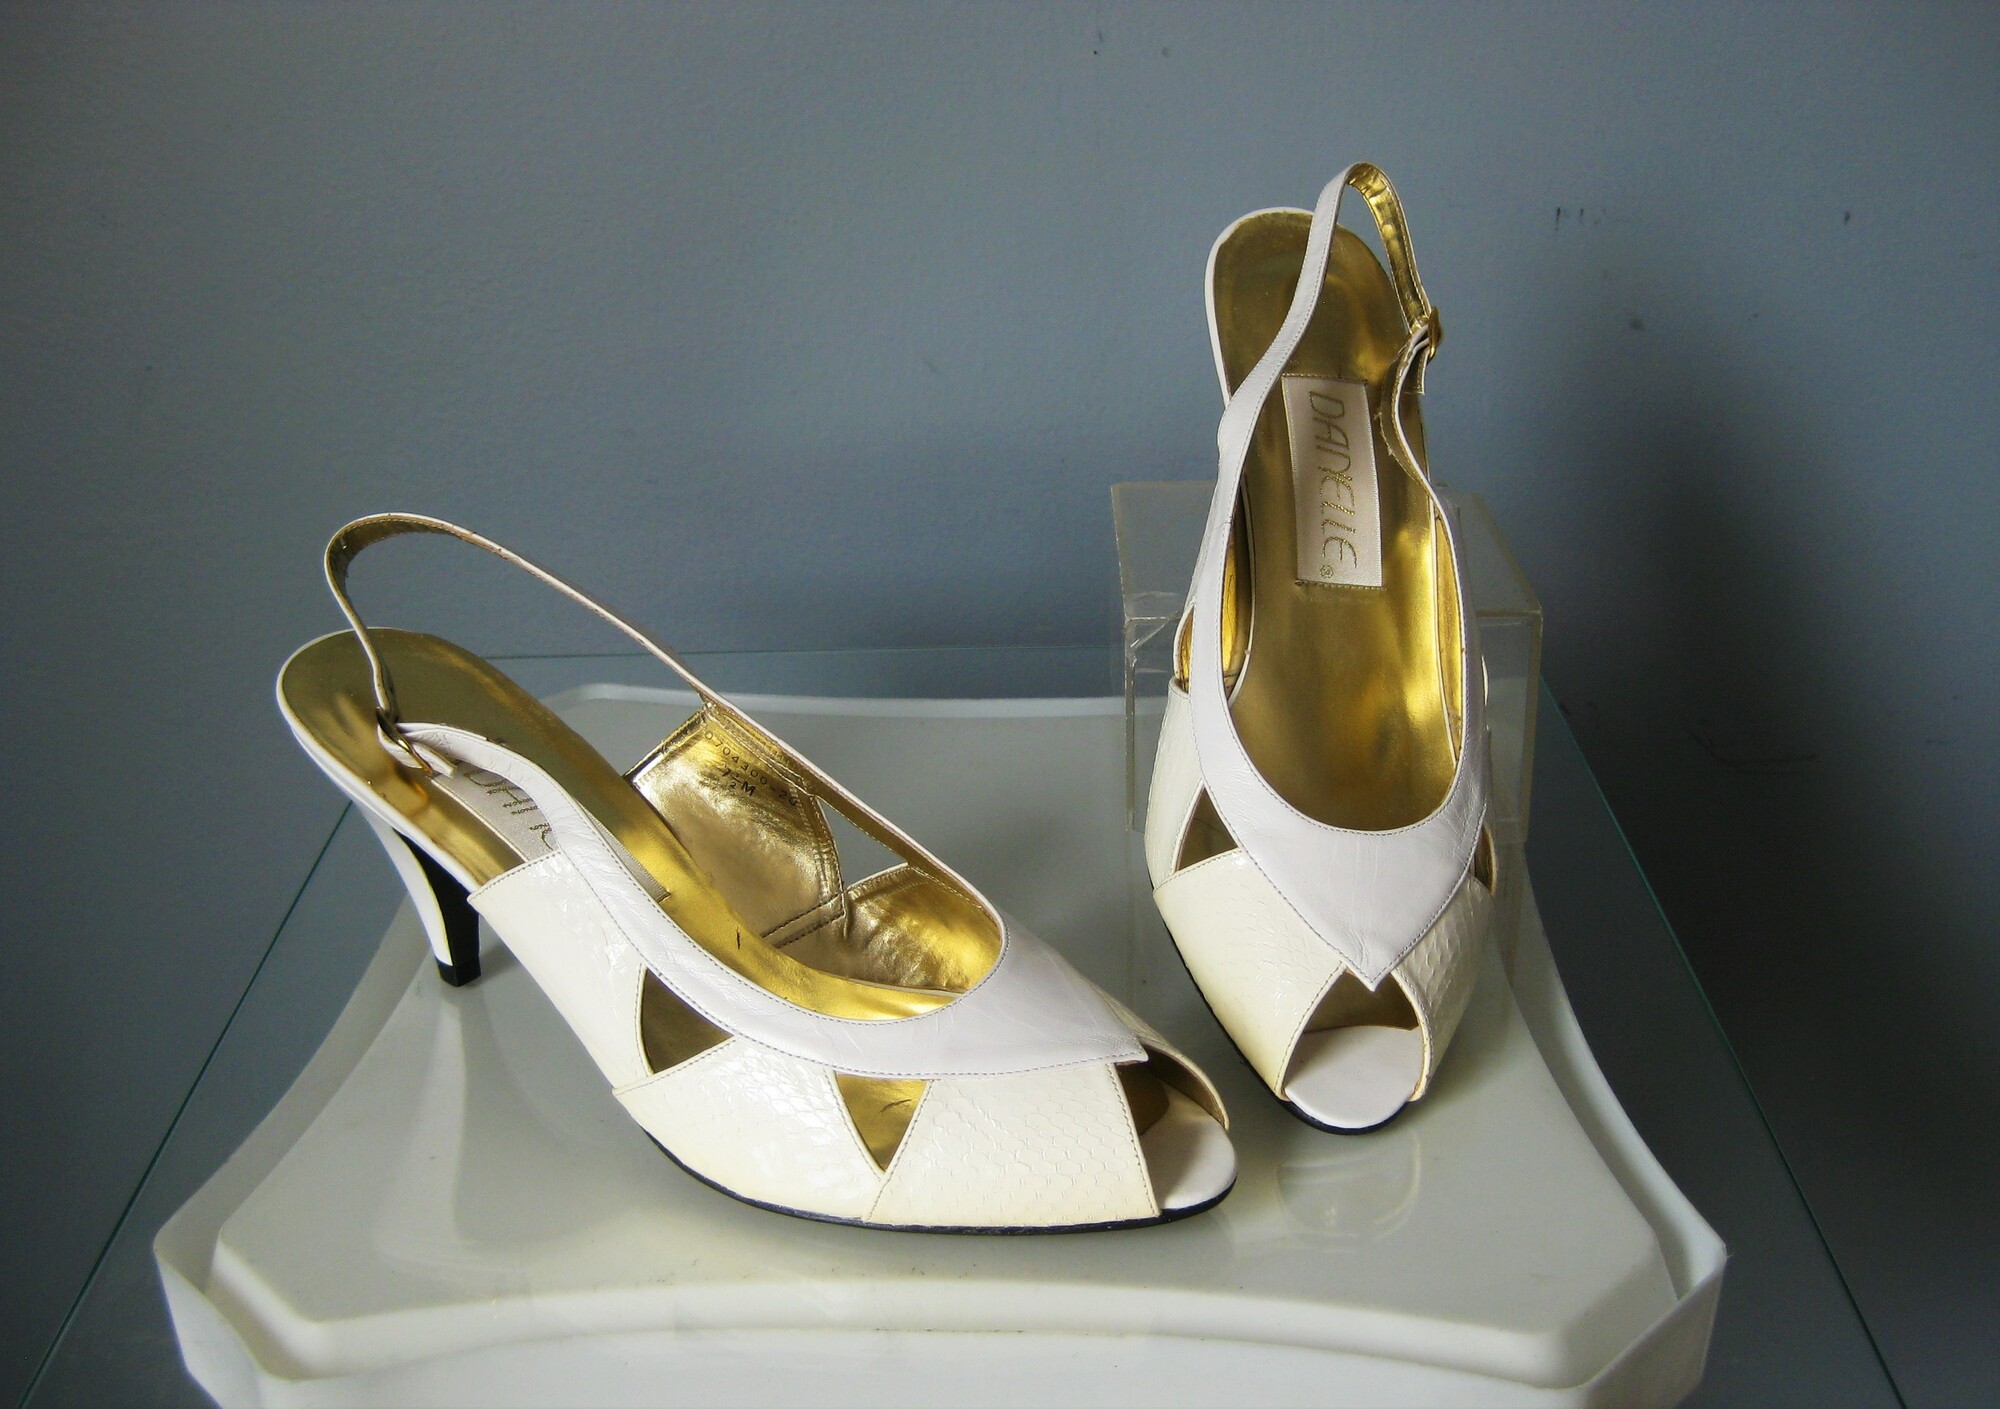 Chic snakeskin slingback pumps from the late 80s or early 90s by Danielle. These are their Beth model.
Ivory in color with bright gold interior.
triangular cutouts
Never worn.
Size 7.5

3 heel

Thank you for looking!
#47167